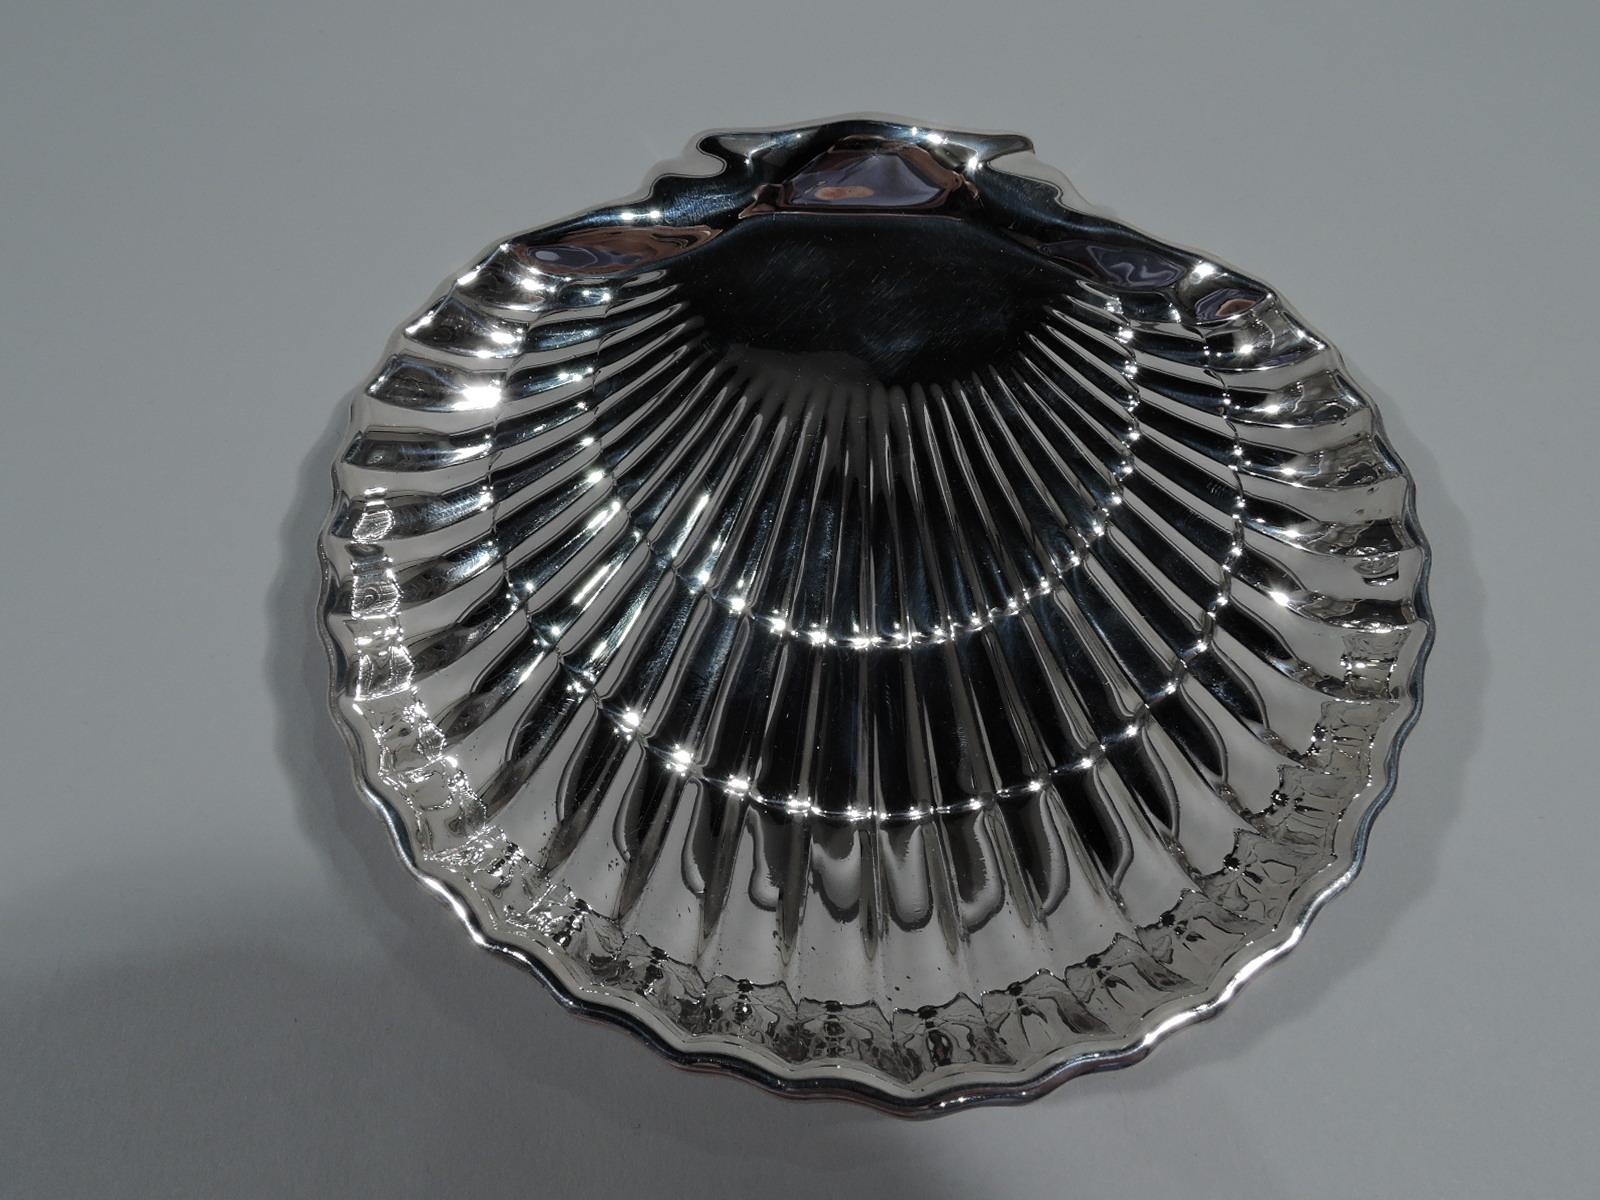 American Set of 12 Gorham Sterling Silver Scallop Shell Seafood Plates